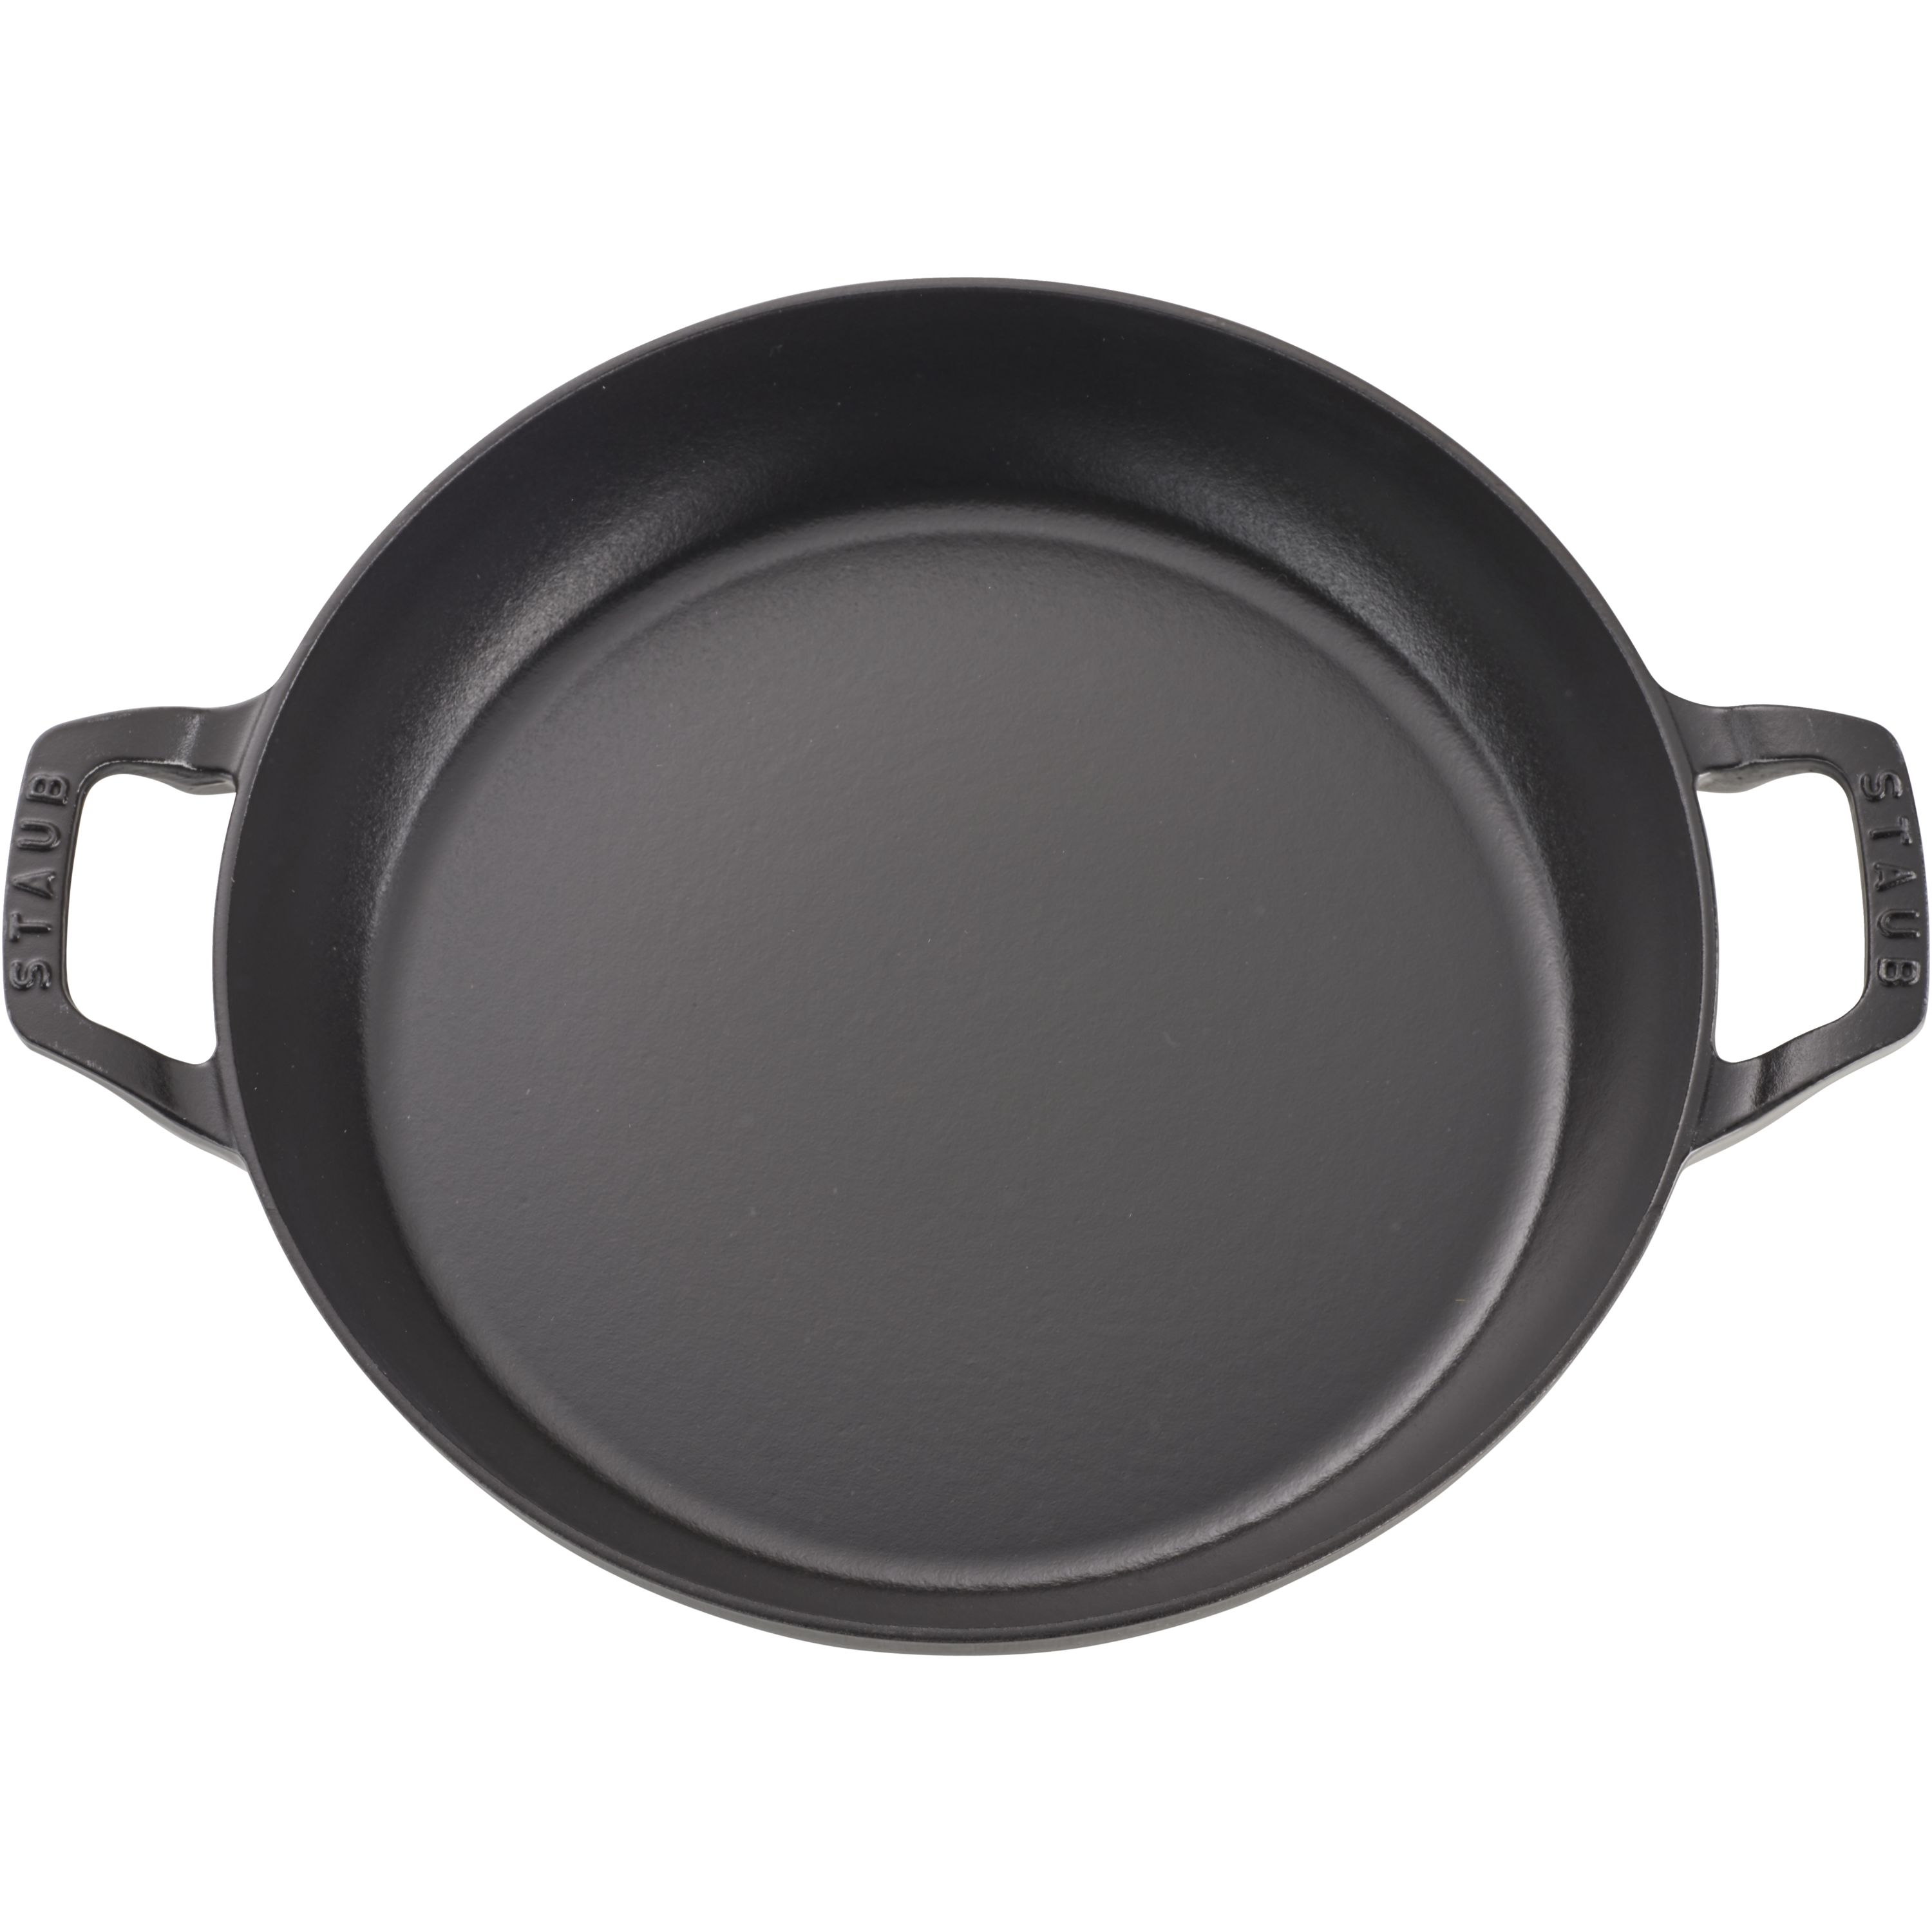 M-COOKER Pre-Seaoned Pizza Pan Cast Iron 12 Inch Dual Loop Handle Skillet  with Two